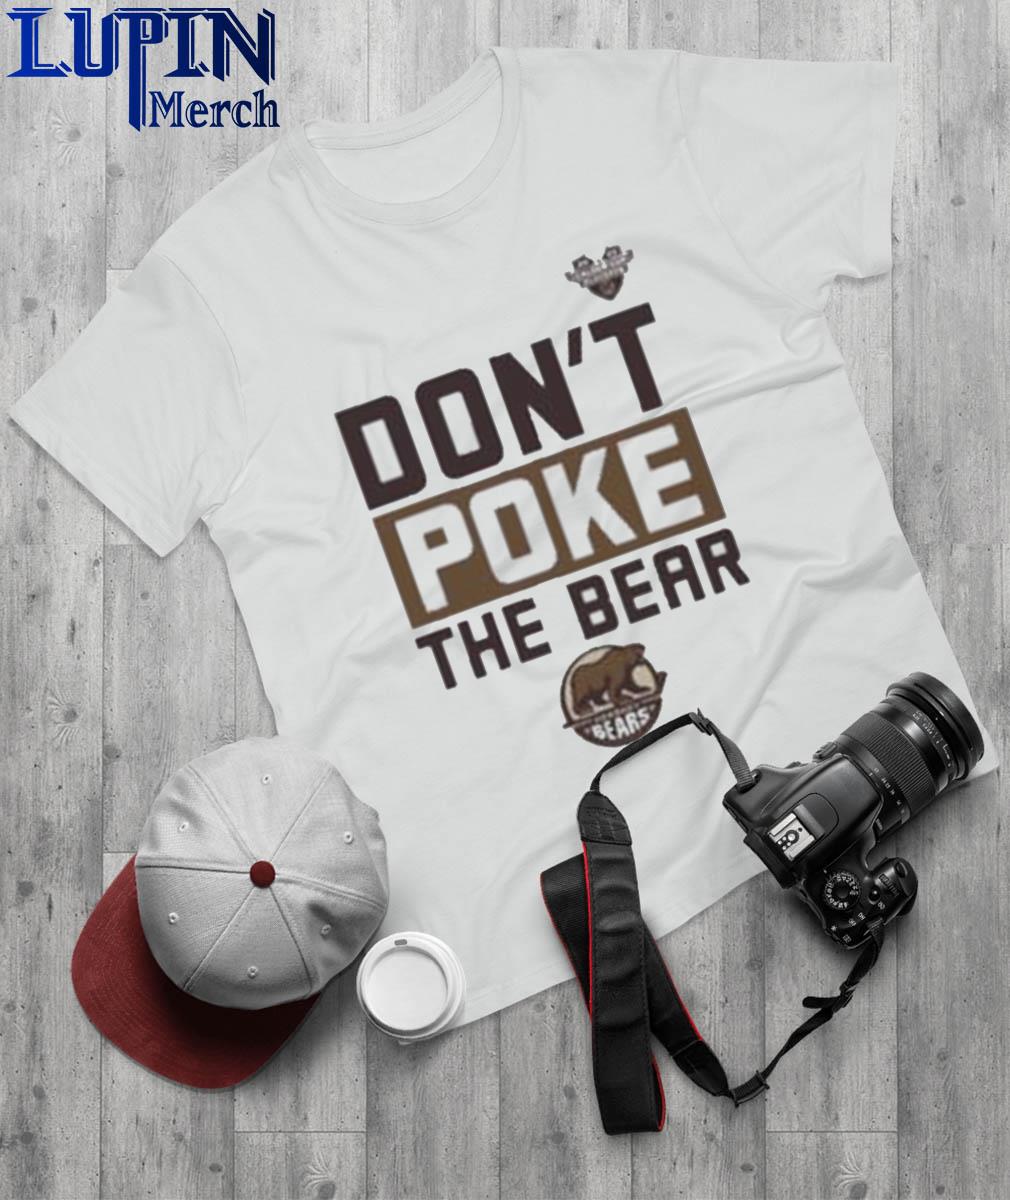 Hershey bears don't poke the bear calder cup playoffs T-shirt, hoodie,  sweater, long sleeve and tank top